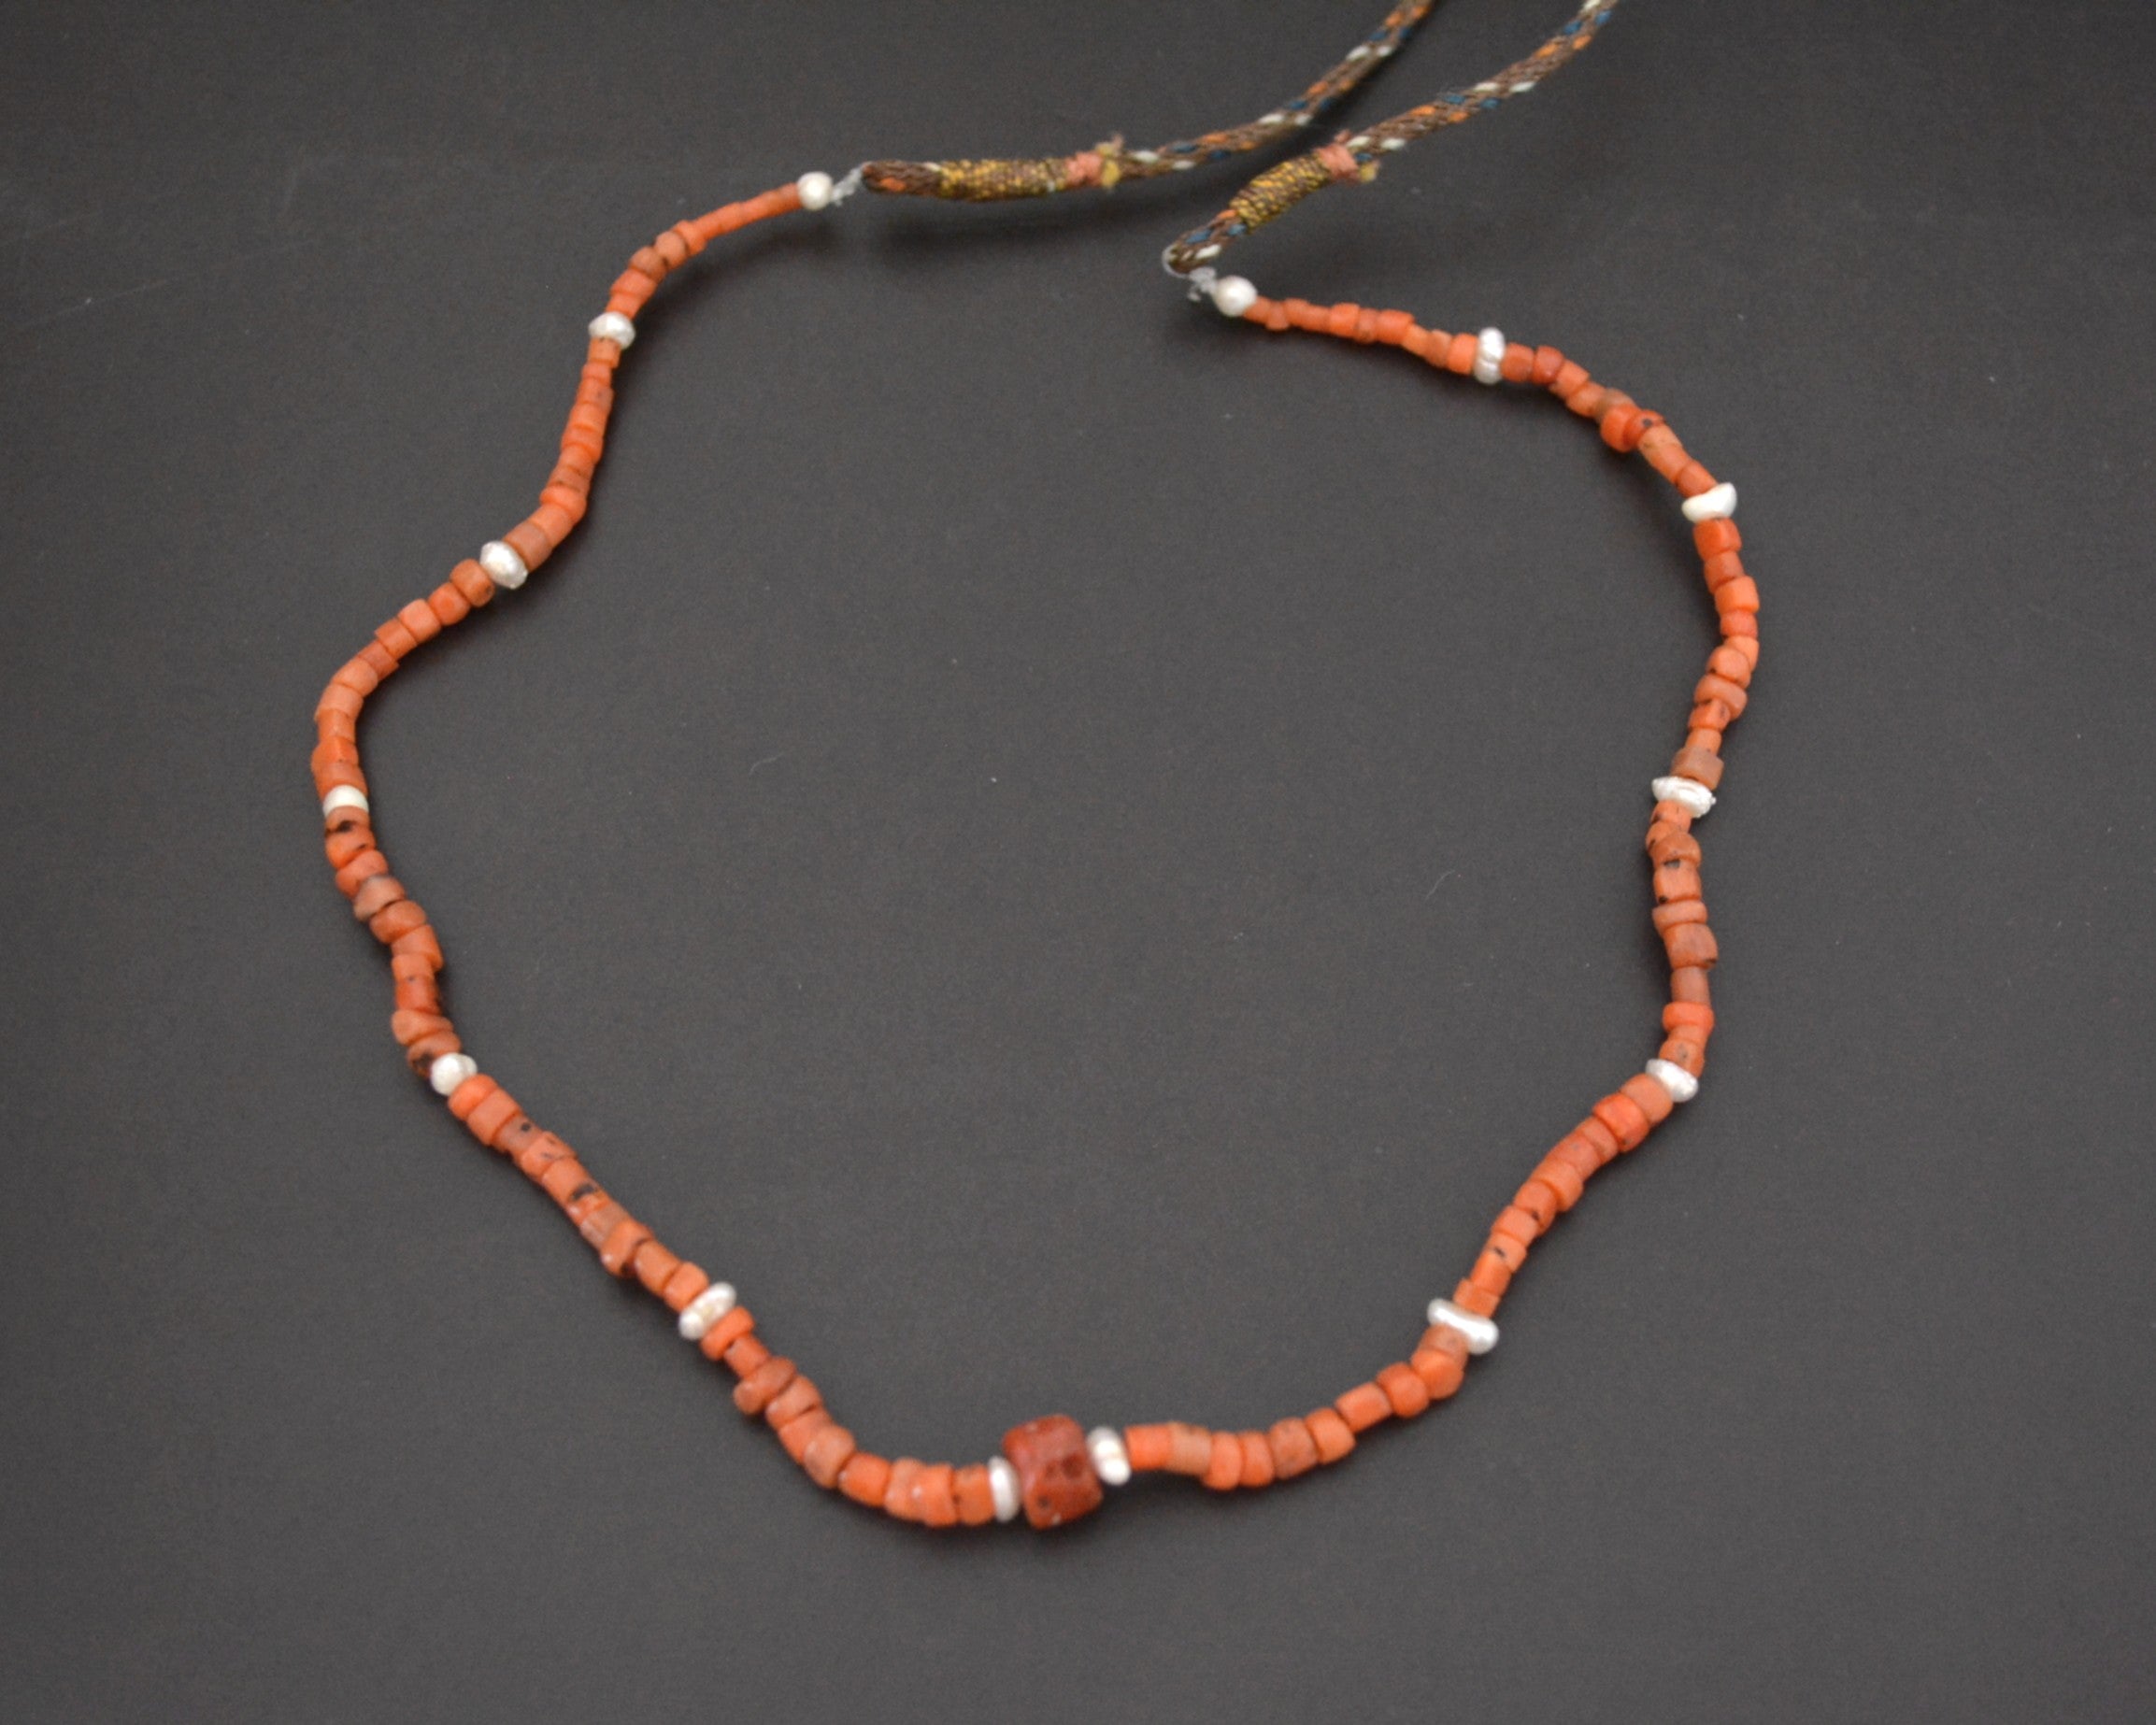 Ethnic Coral Pearl Beads Necklace from India - On Cotton Cord